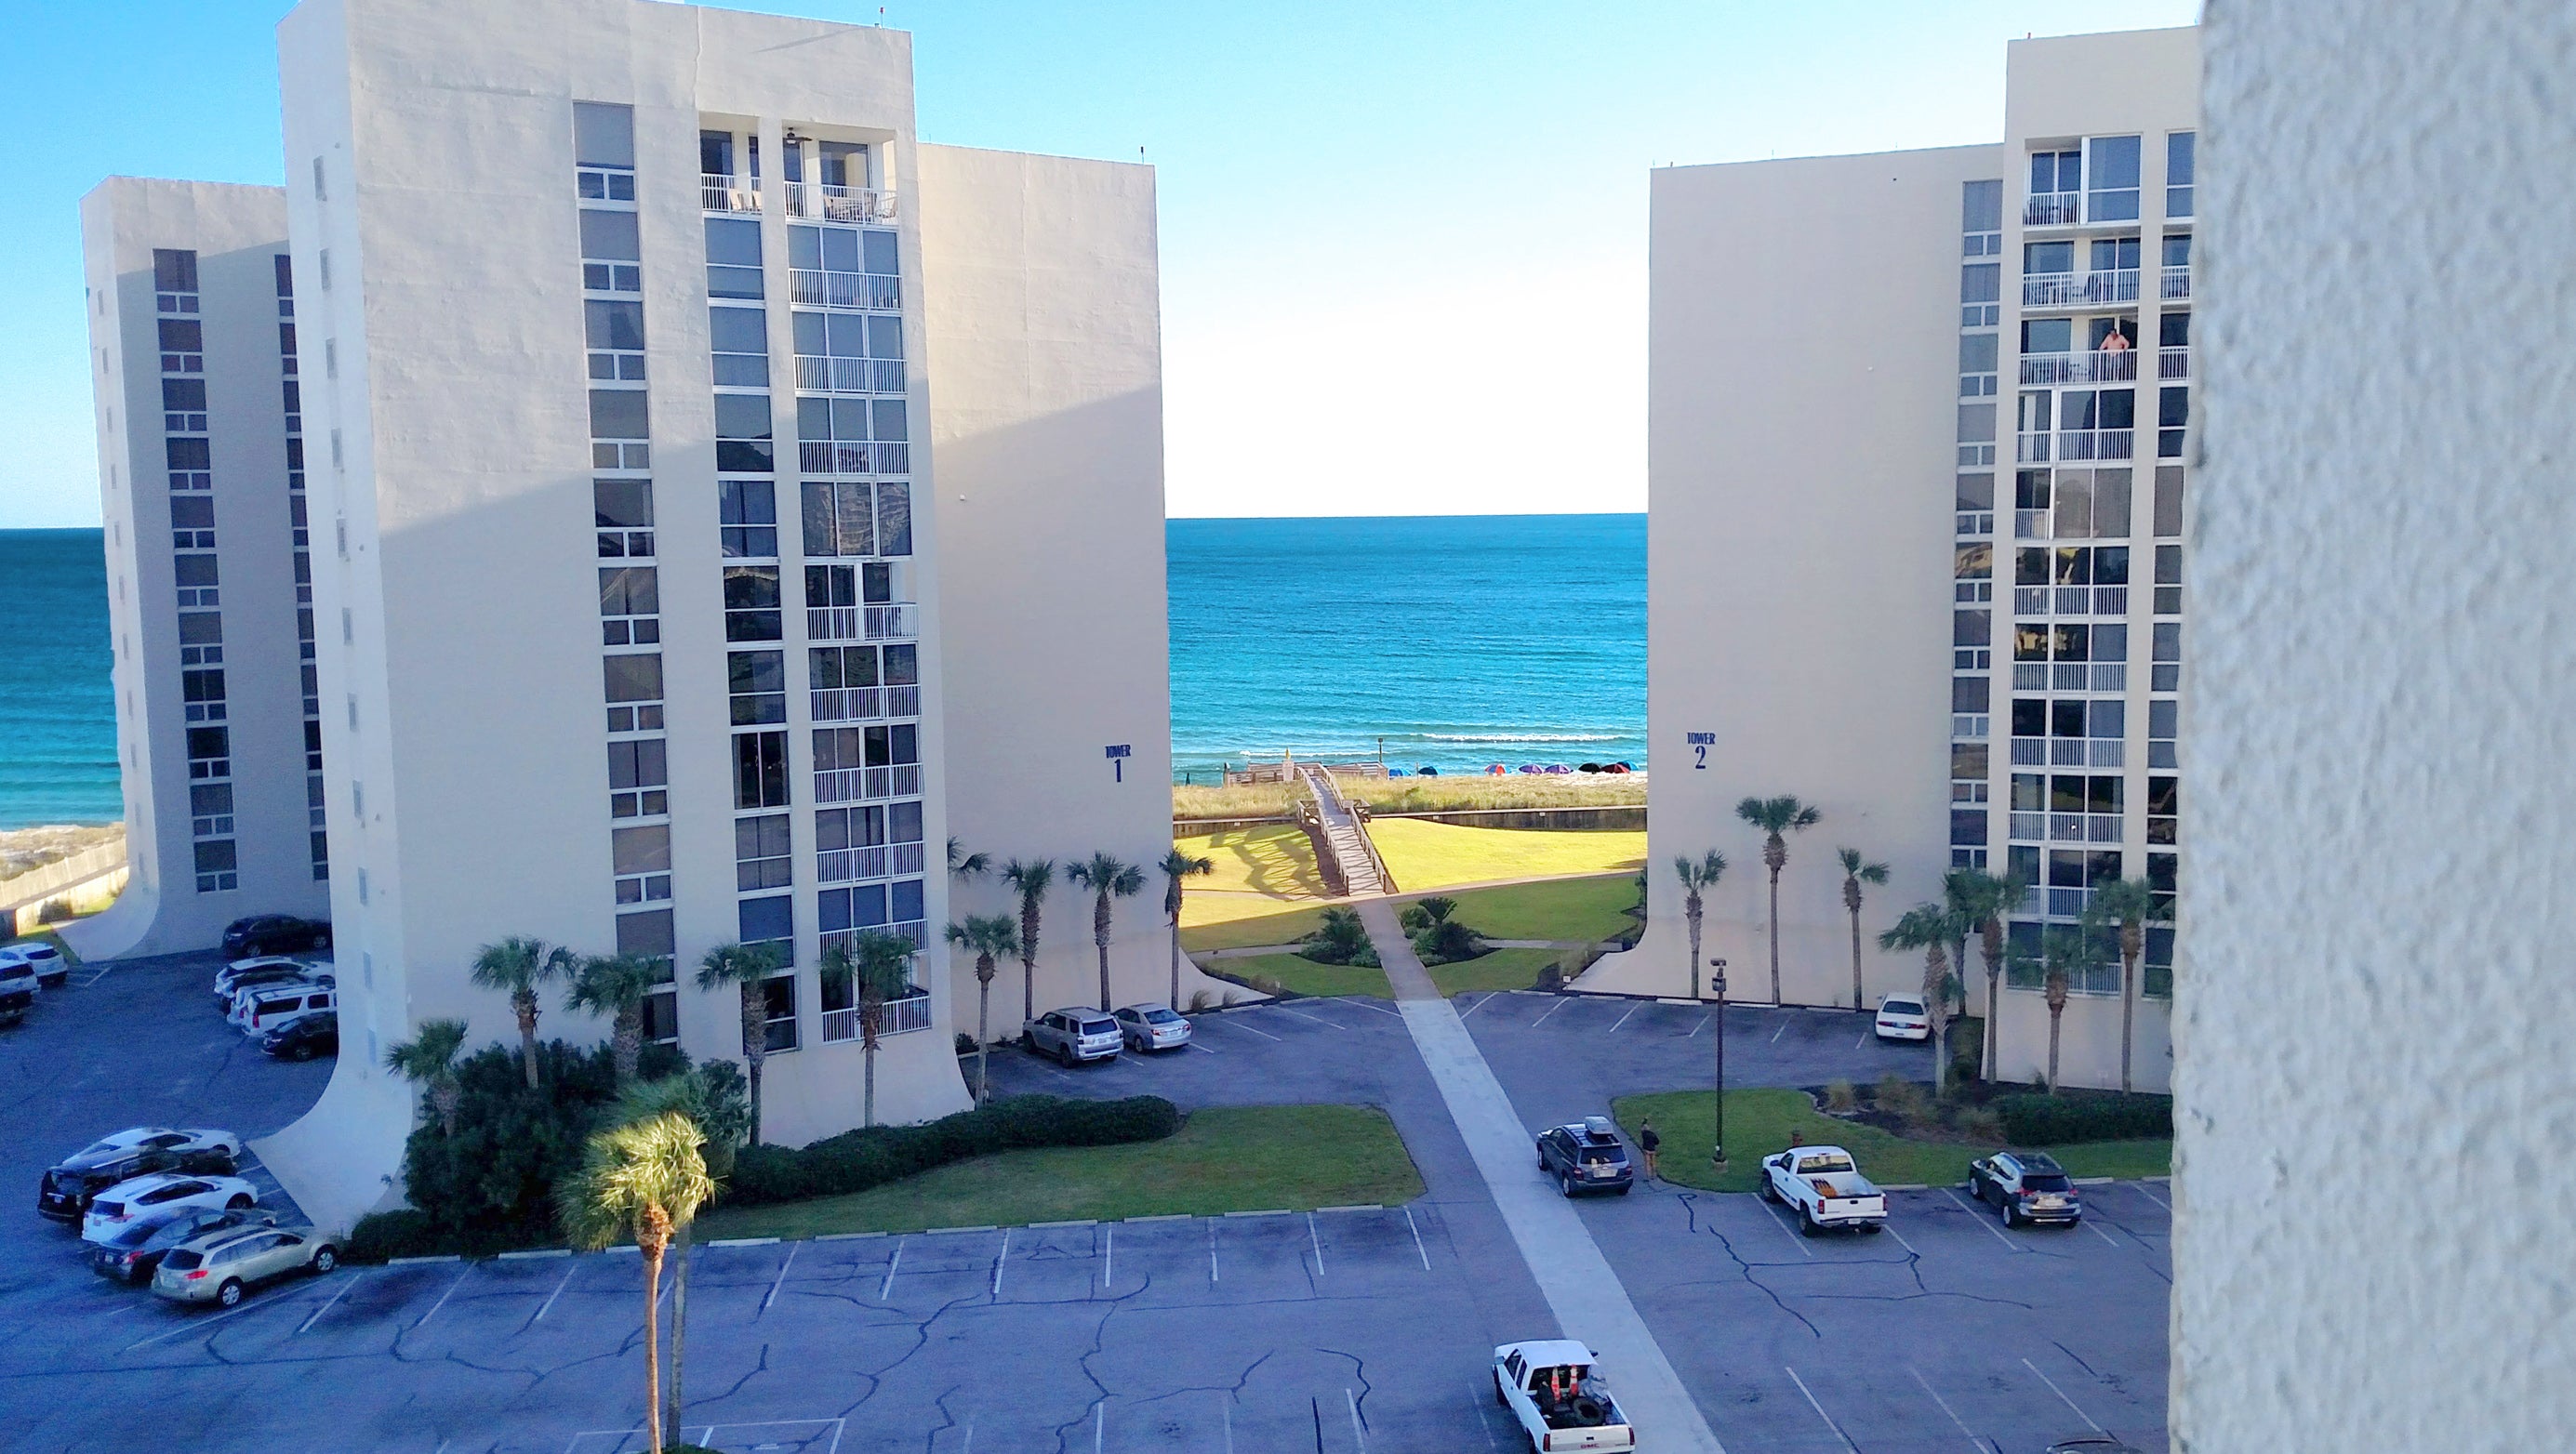 Short Walk to Beach Access from Building 3!